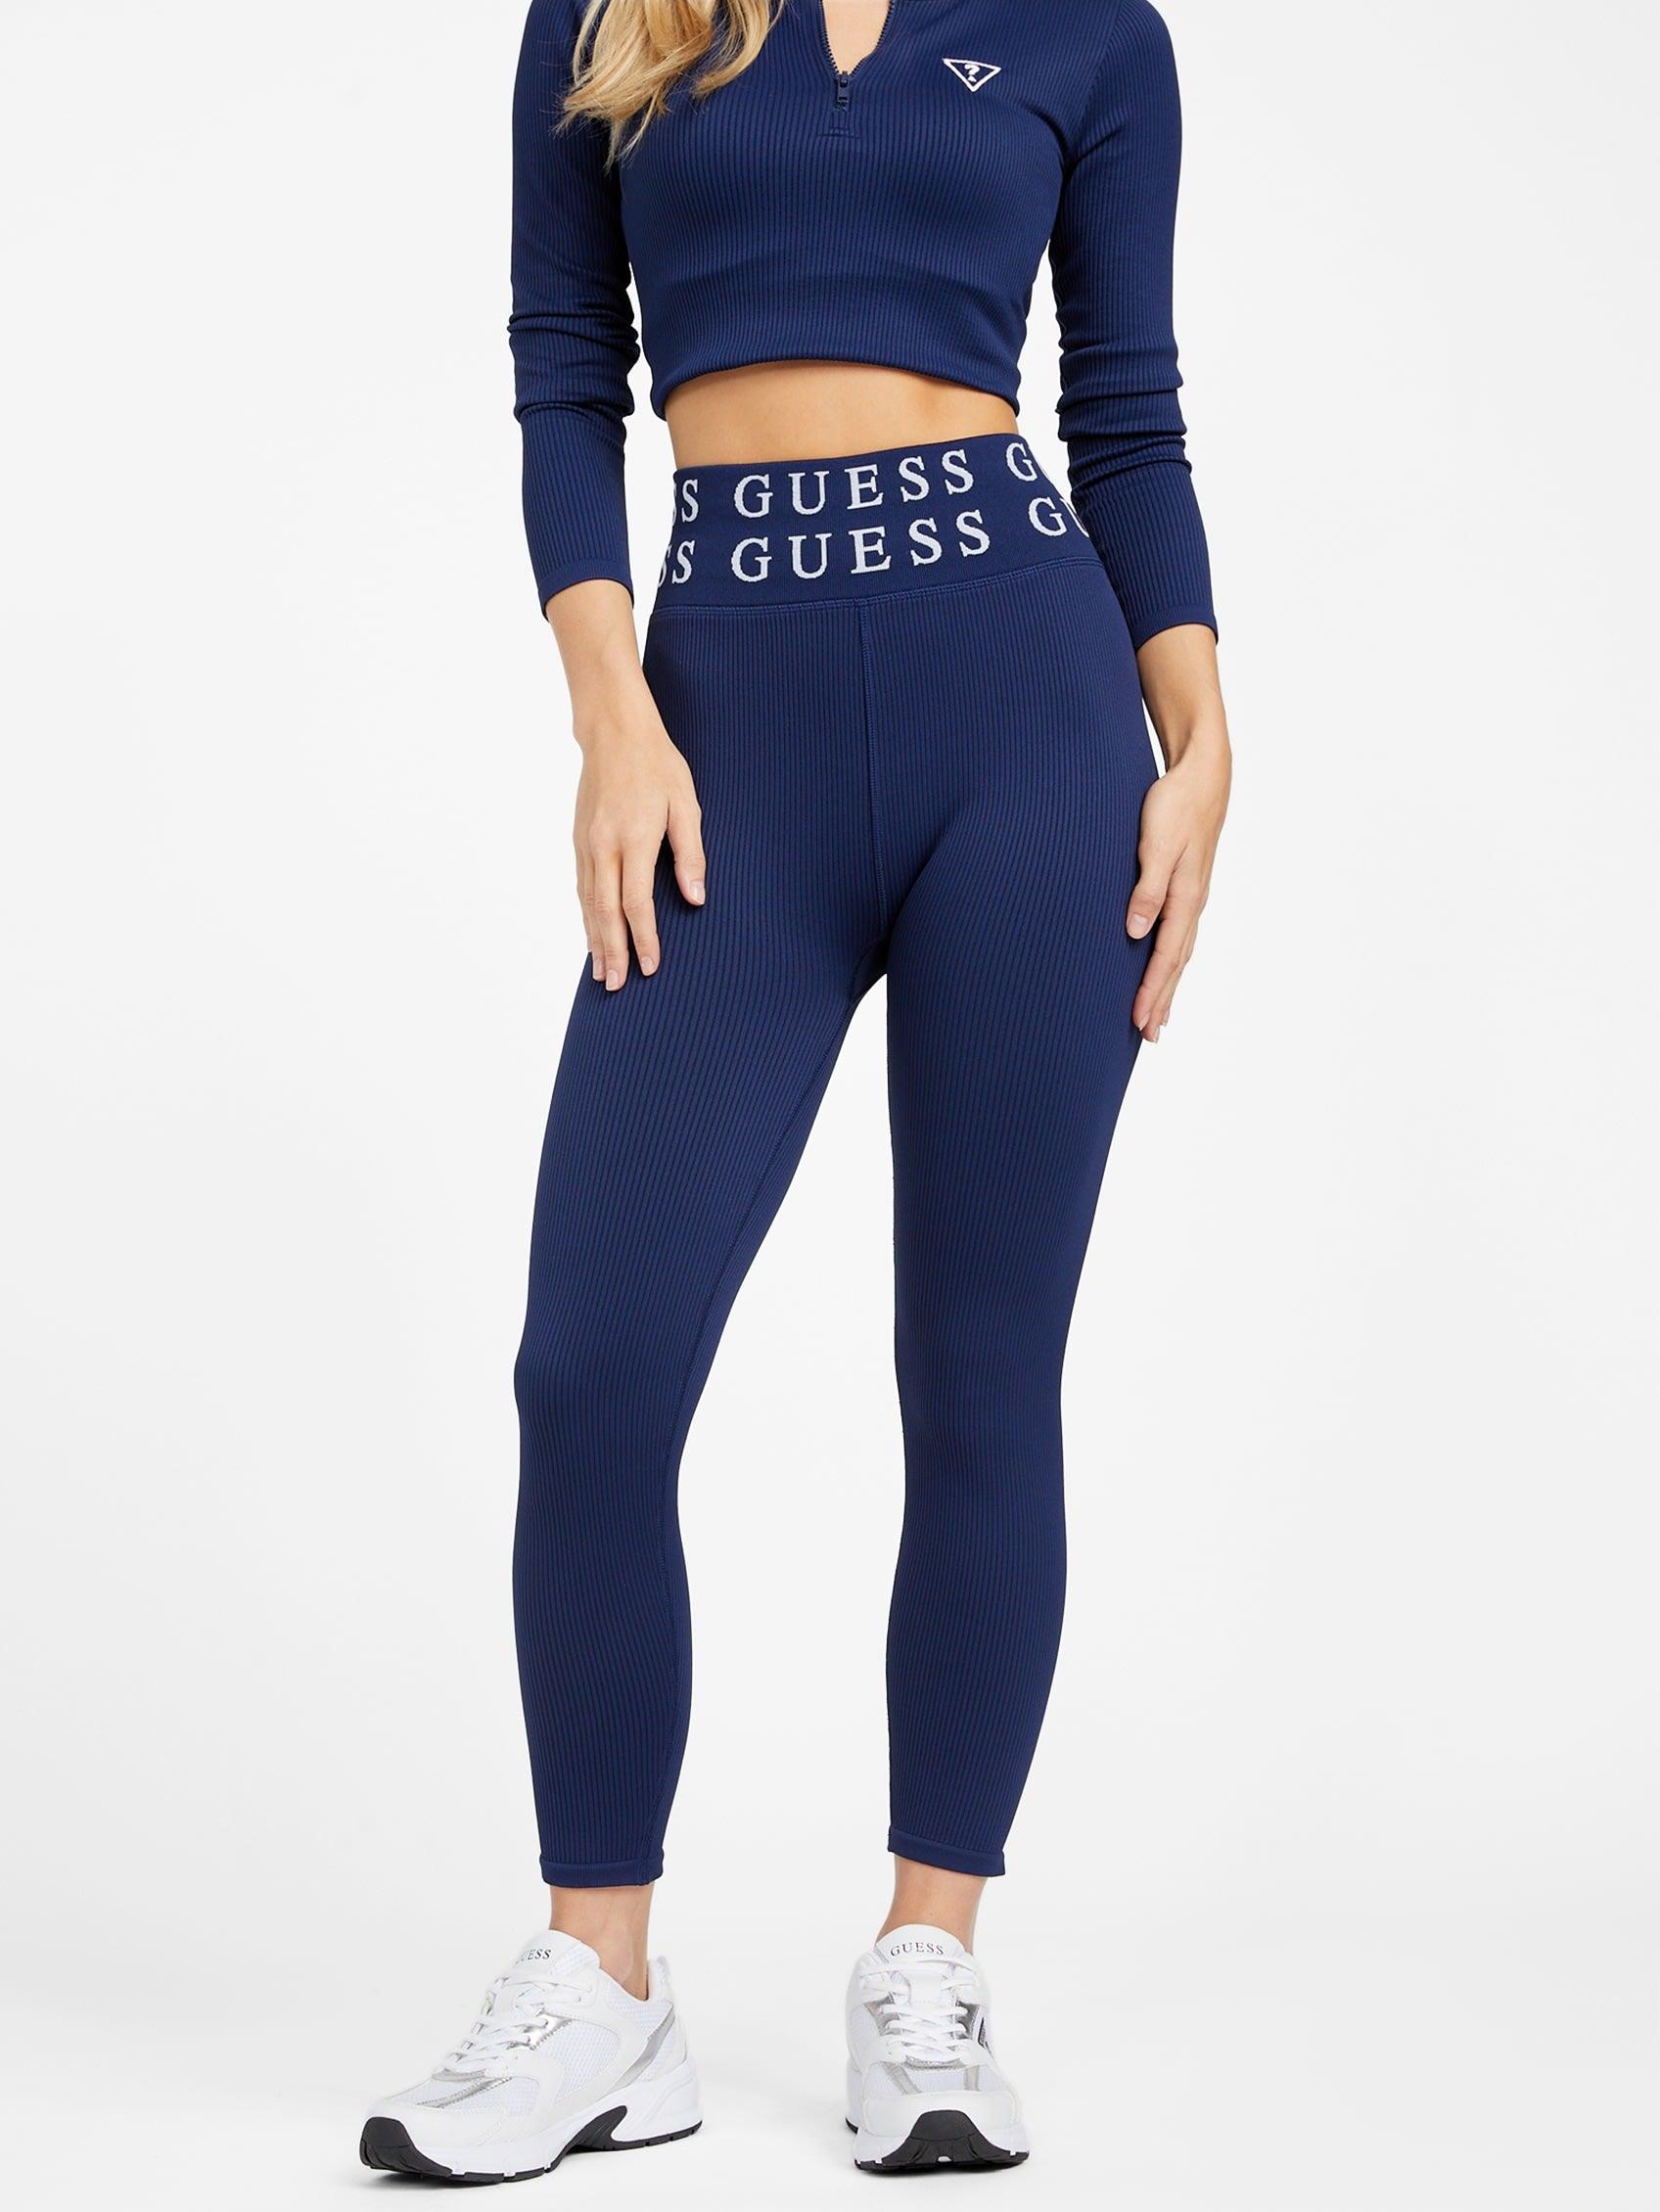 Guess Factory Laila Seamless Leggings in Blue